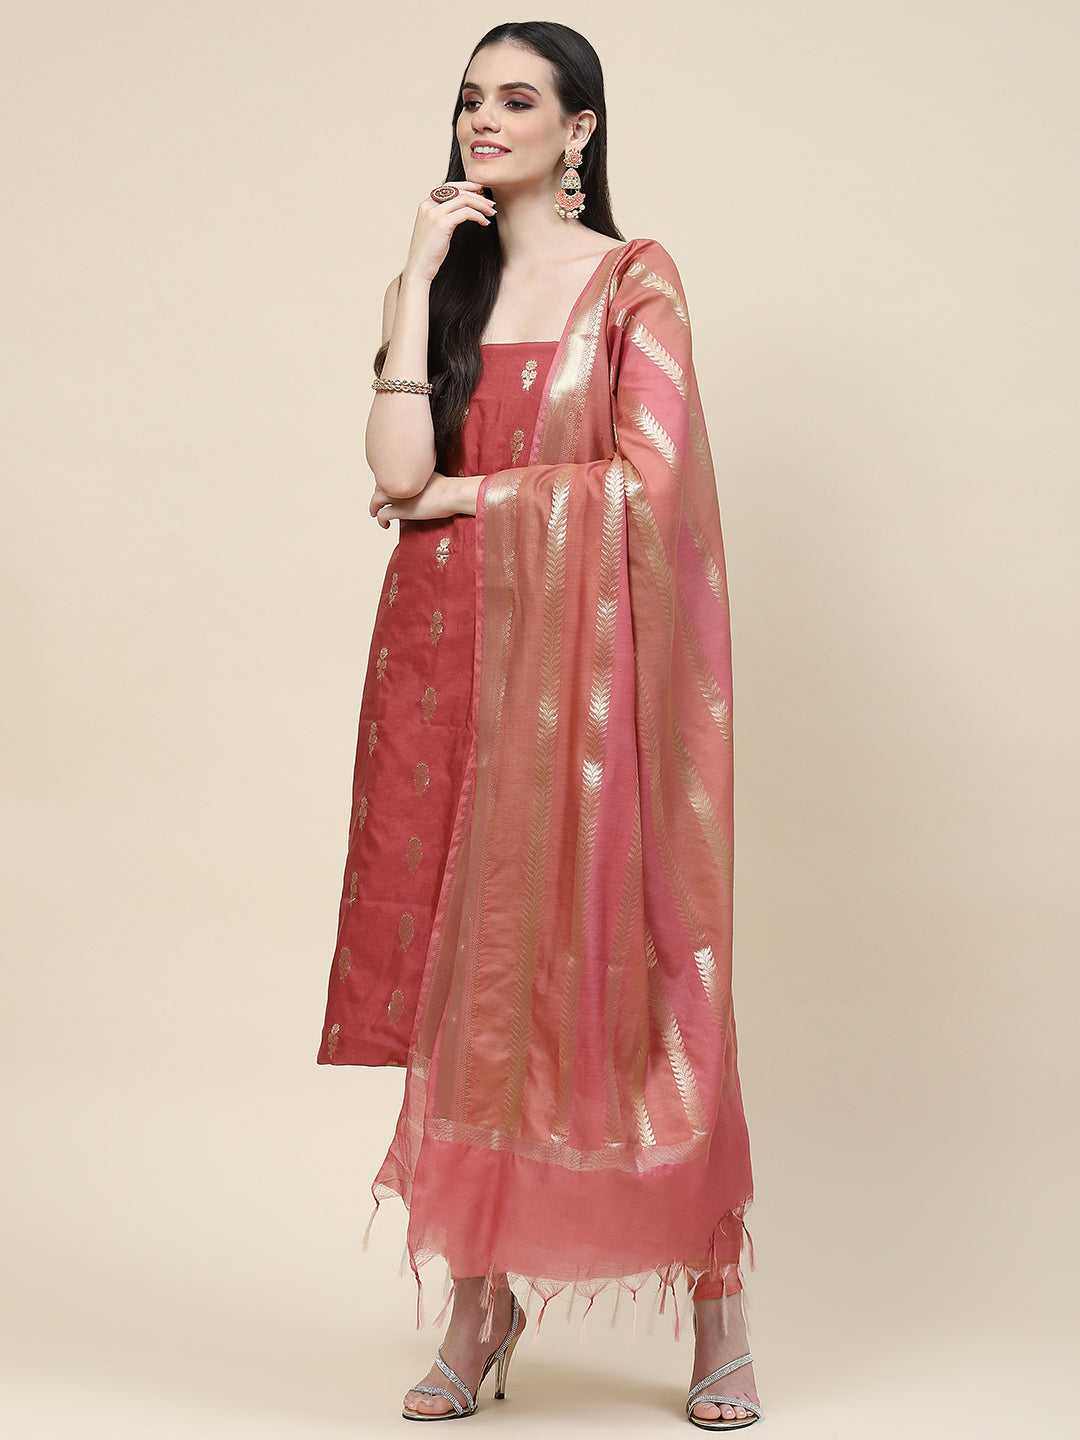 Woven Booti Chanderi Unstitched Suit Piece With Dupatta